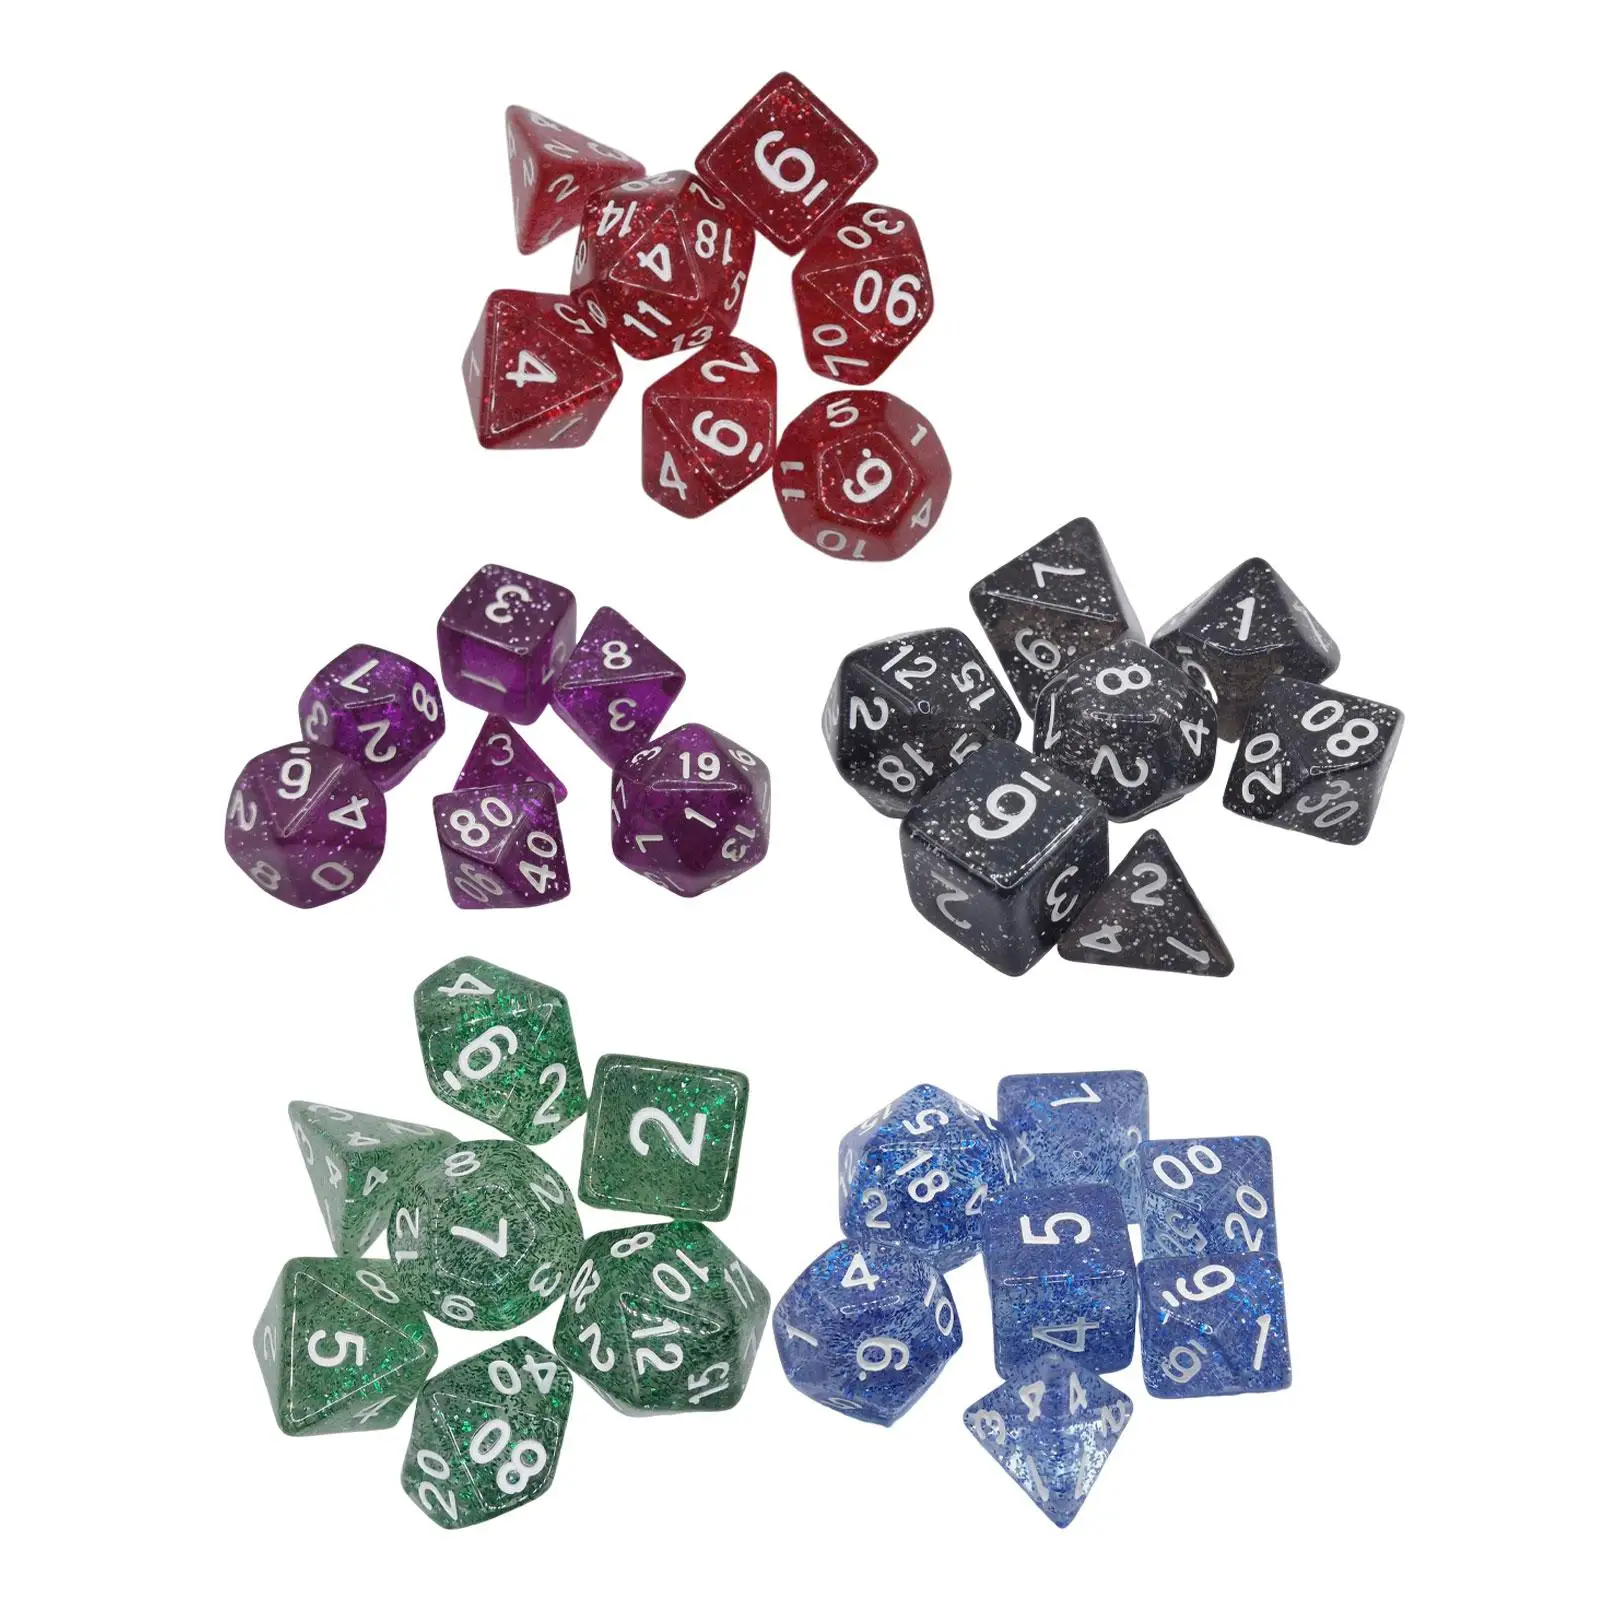 7x Polyhedral Dices D20,D12,D10 (00-90 and 0-9),D8,D6 and D4. for Party Favors Entertainment Math Teaching Game Kids Toy